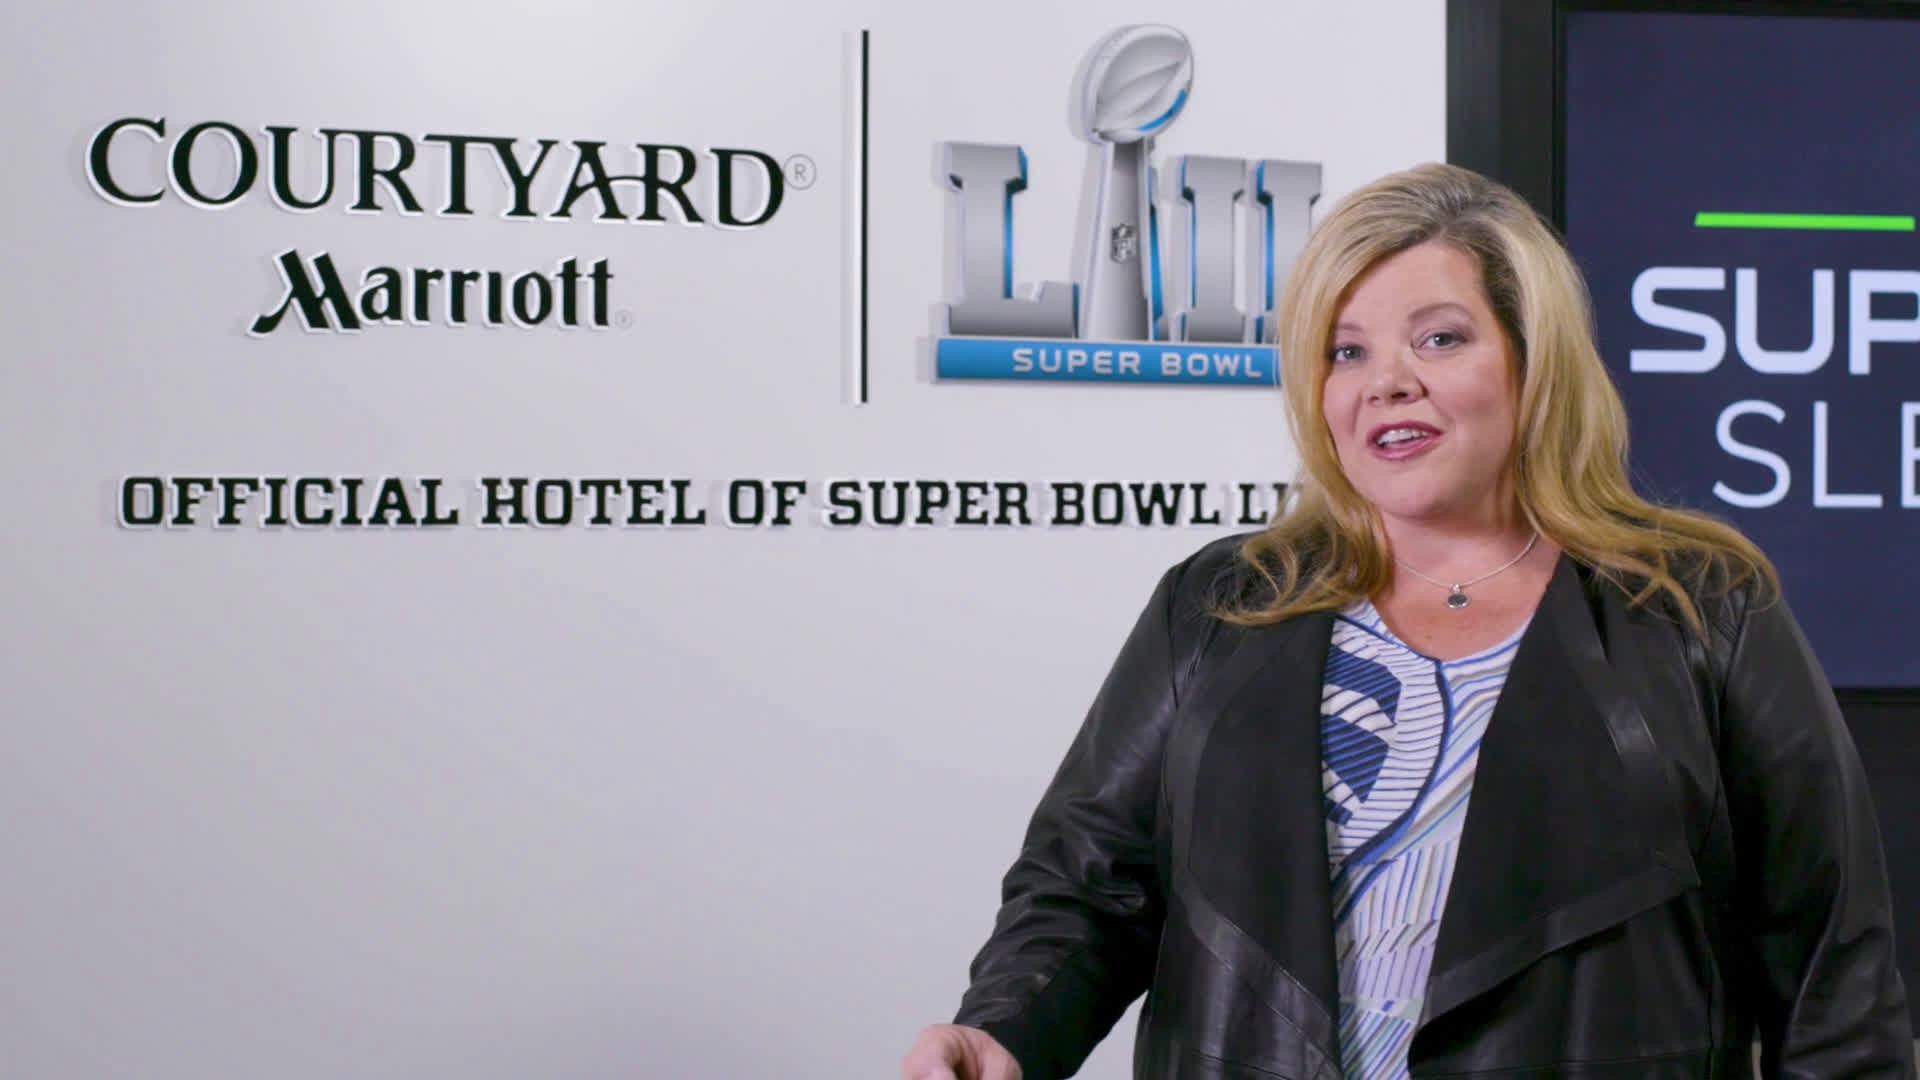 Courtyard by Marriott's "Superbowl Sleepover Contest"